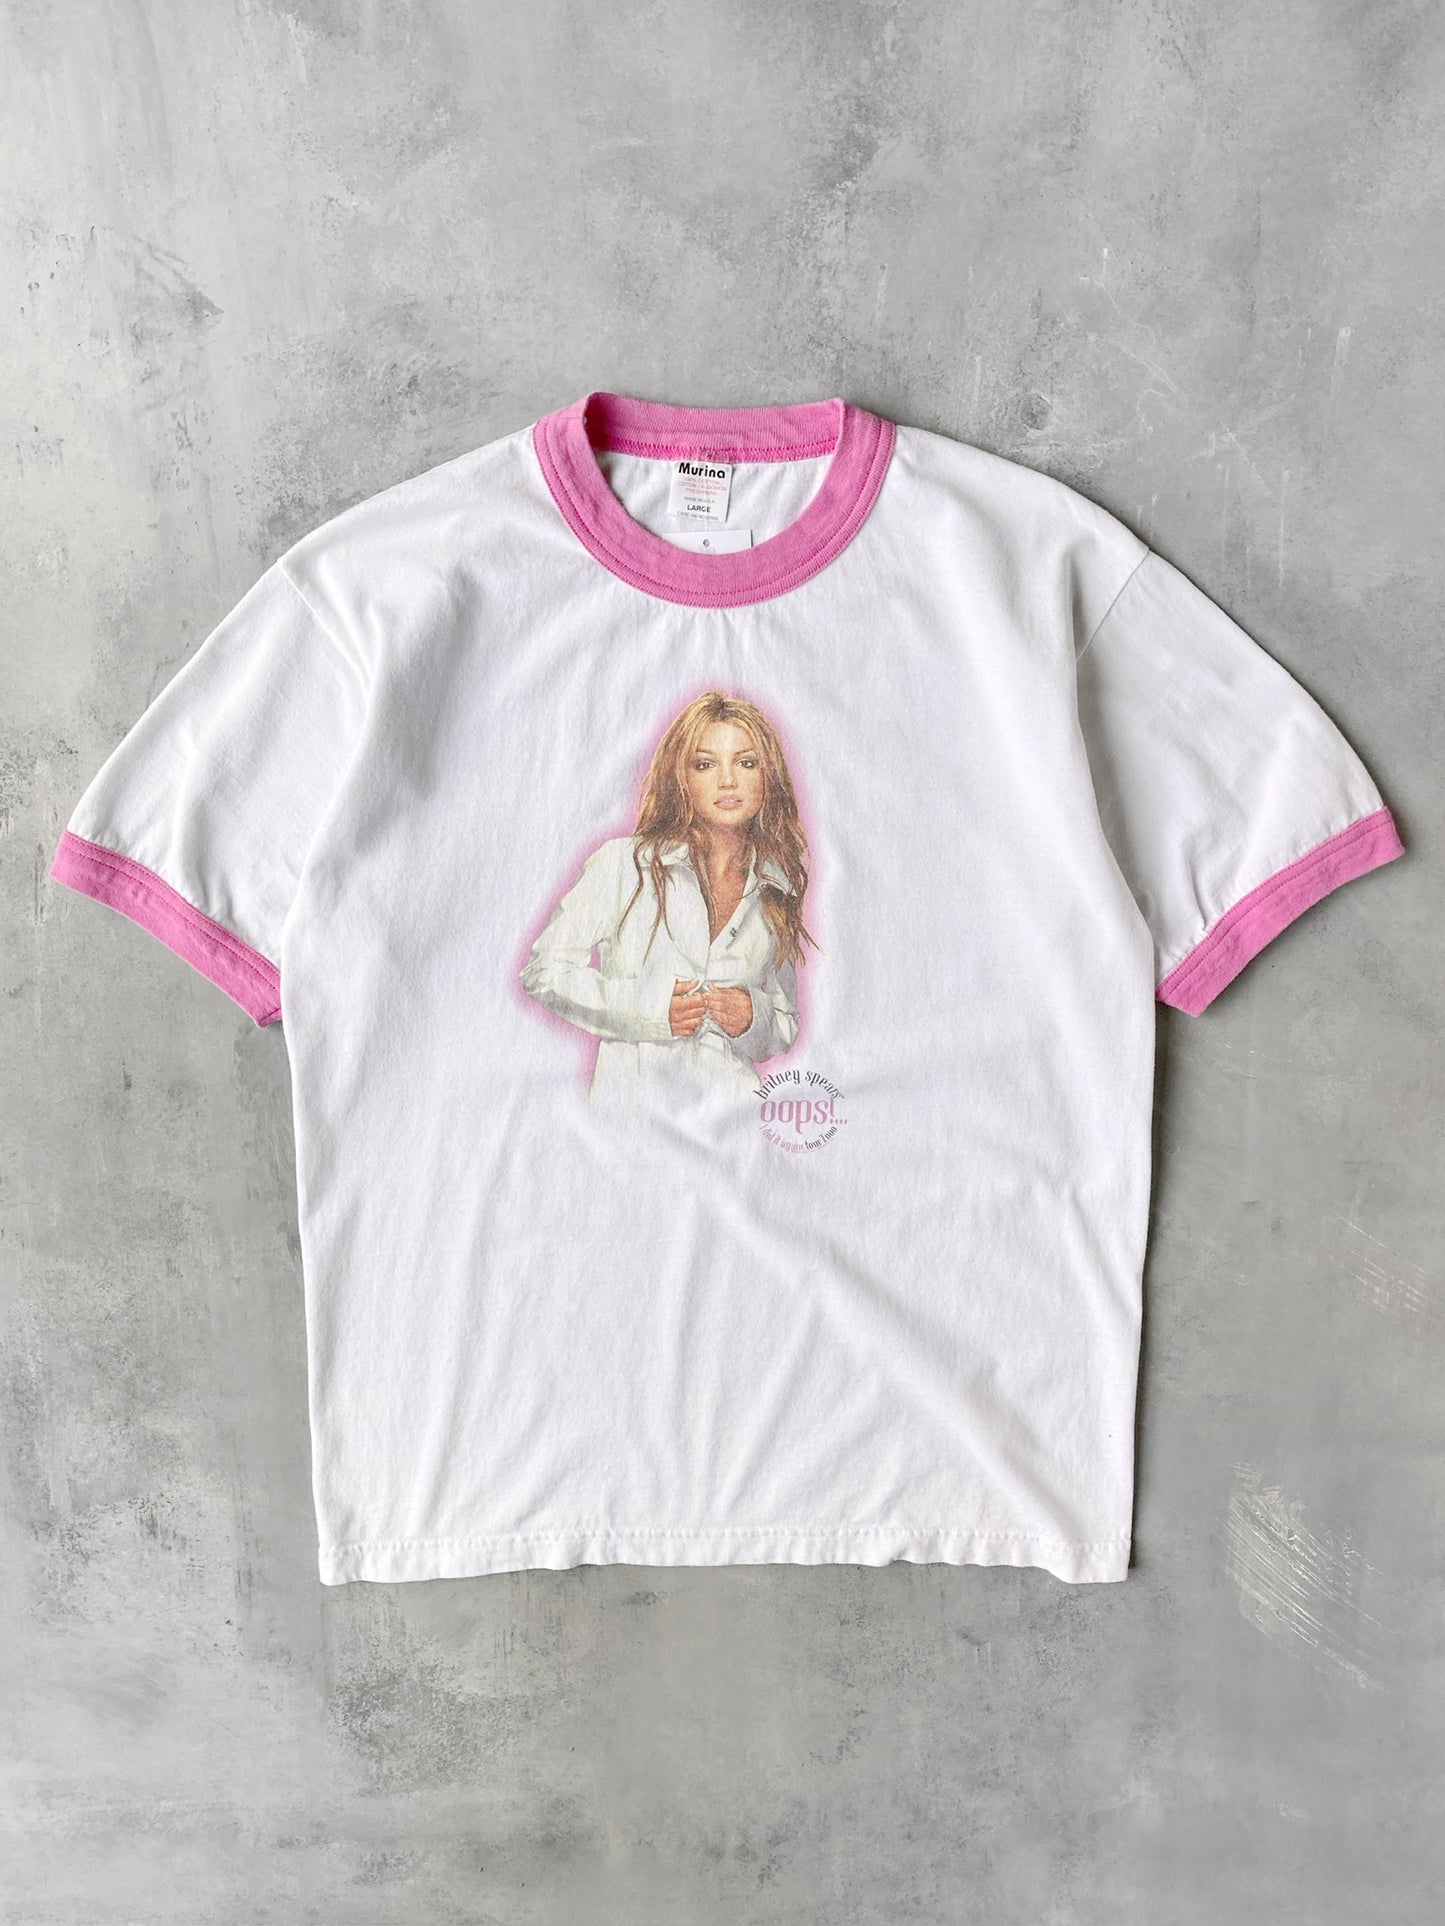 Britney Spears Tour T-Shirt '00 - Large